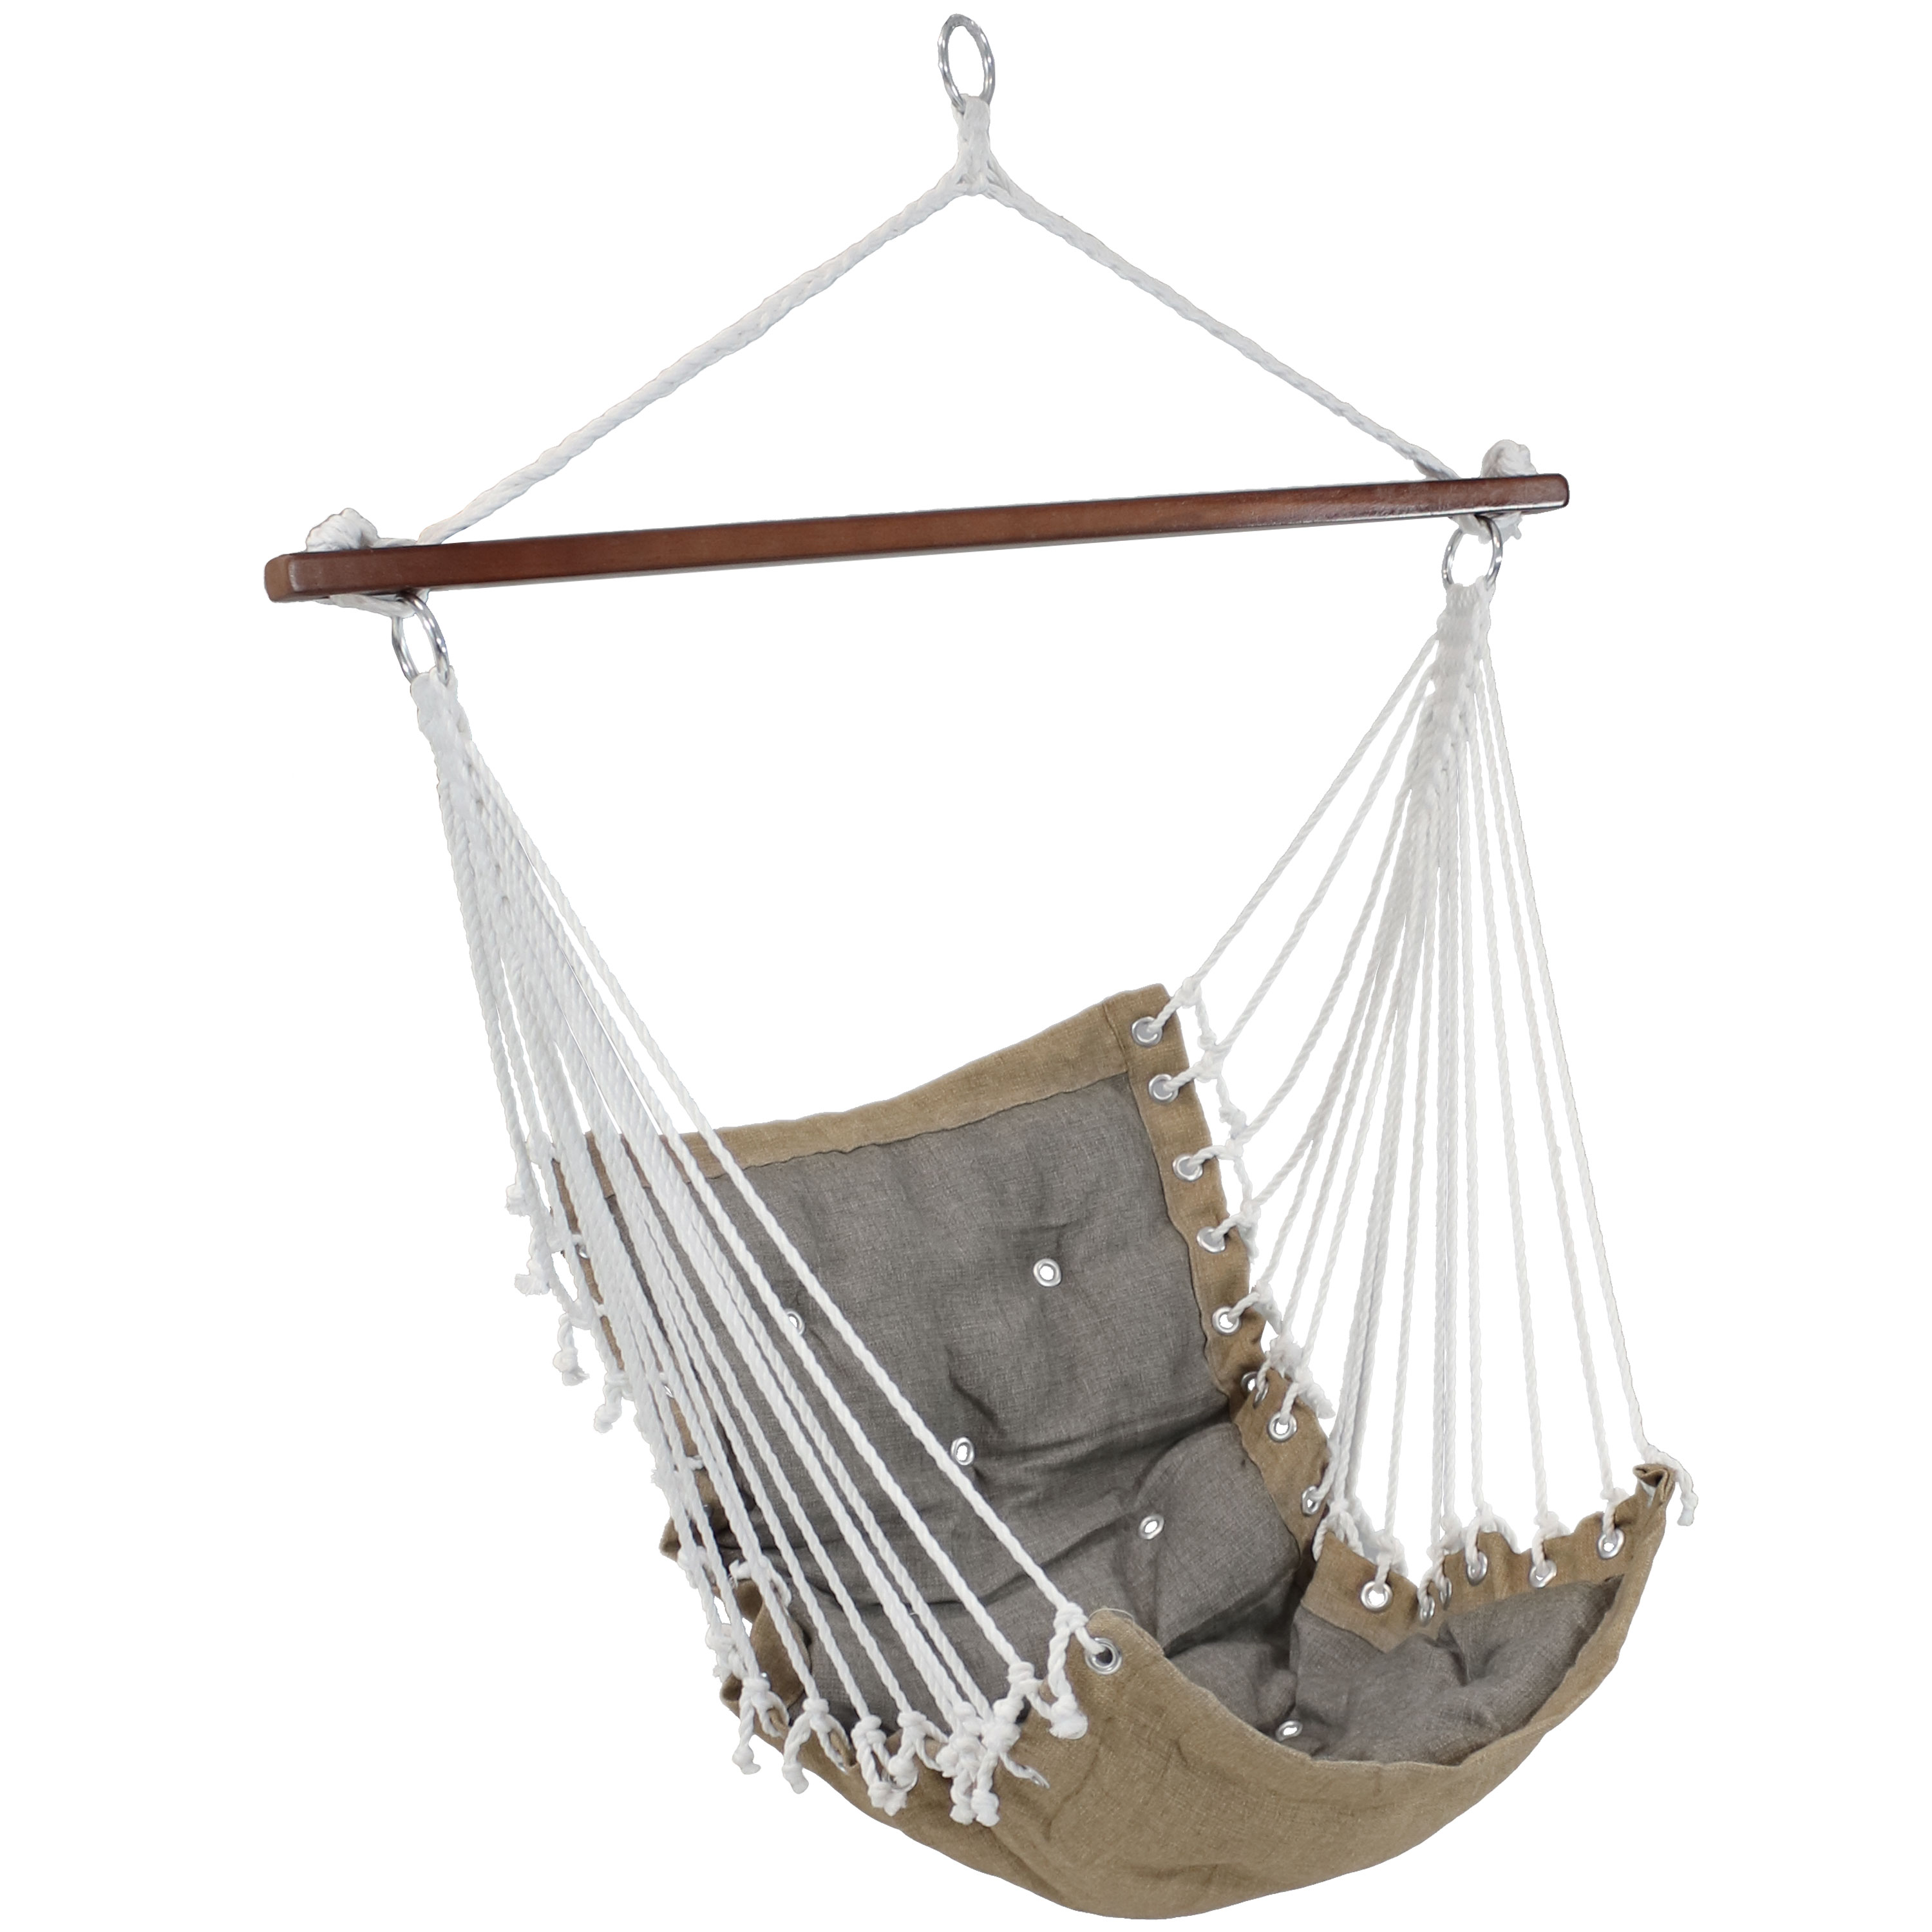 Sunnydaze Tufted Victorian Hammock Swing for Outdoor Use, 300-Pound Weight Capacity, Gray